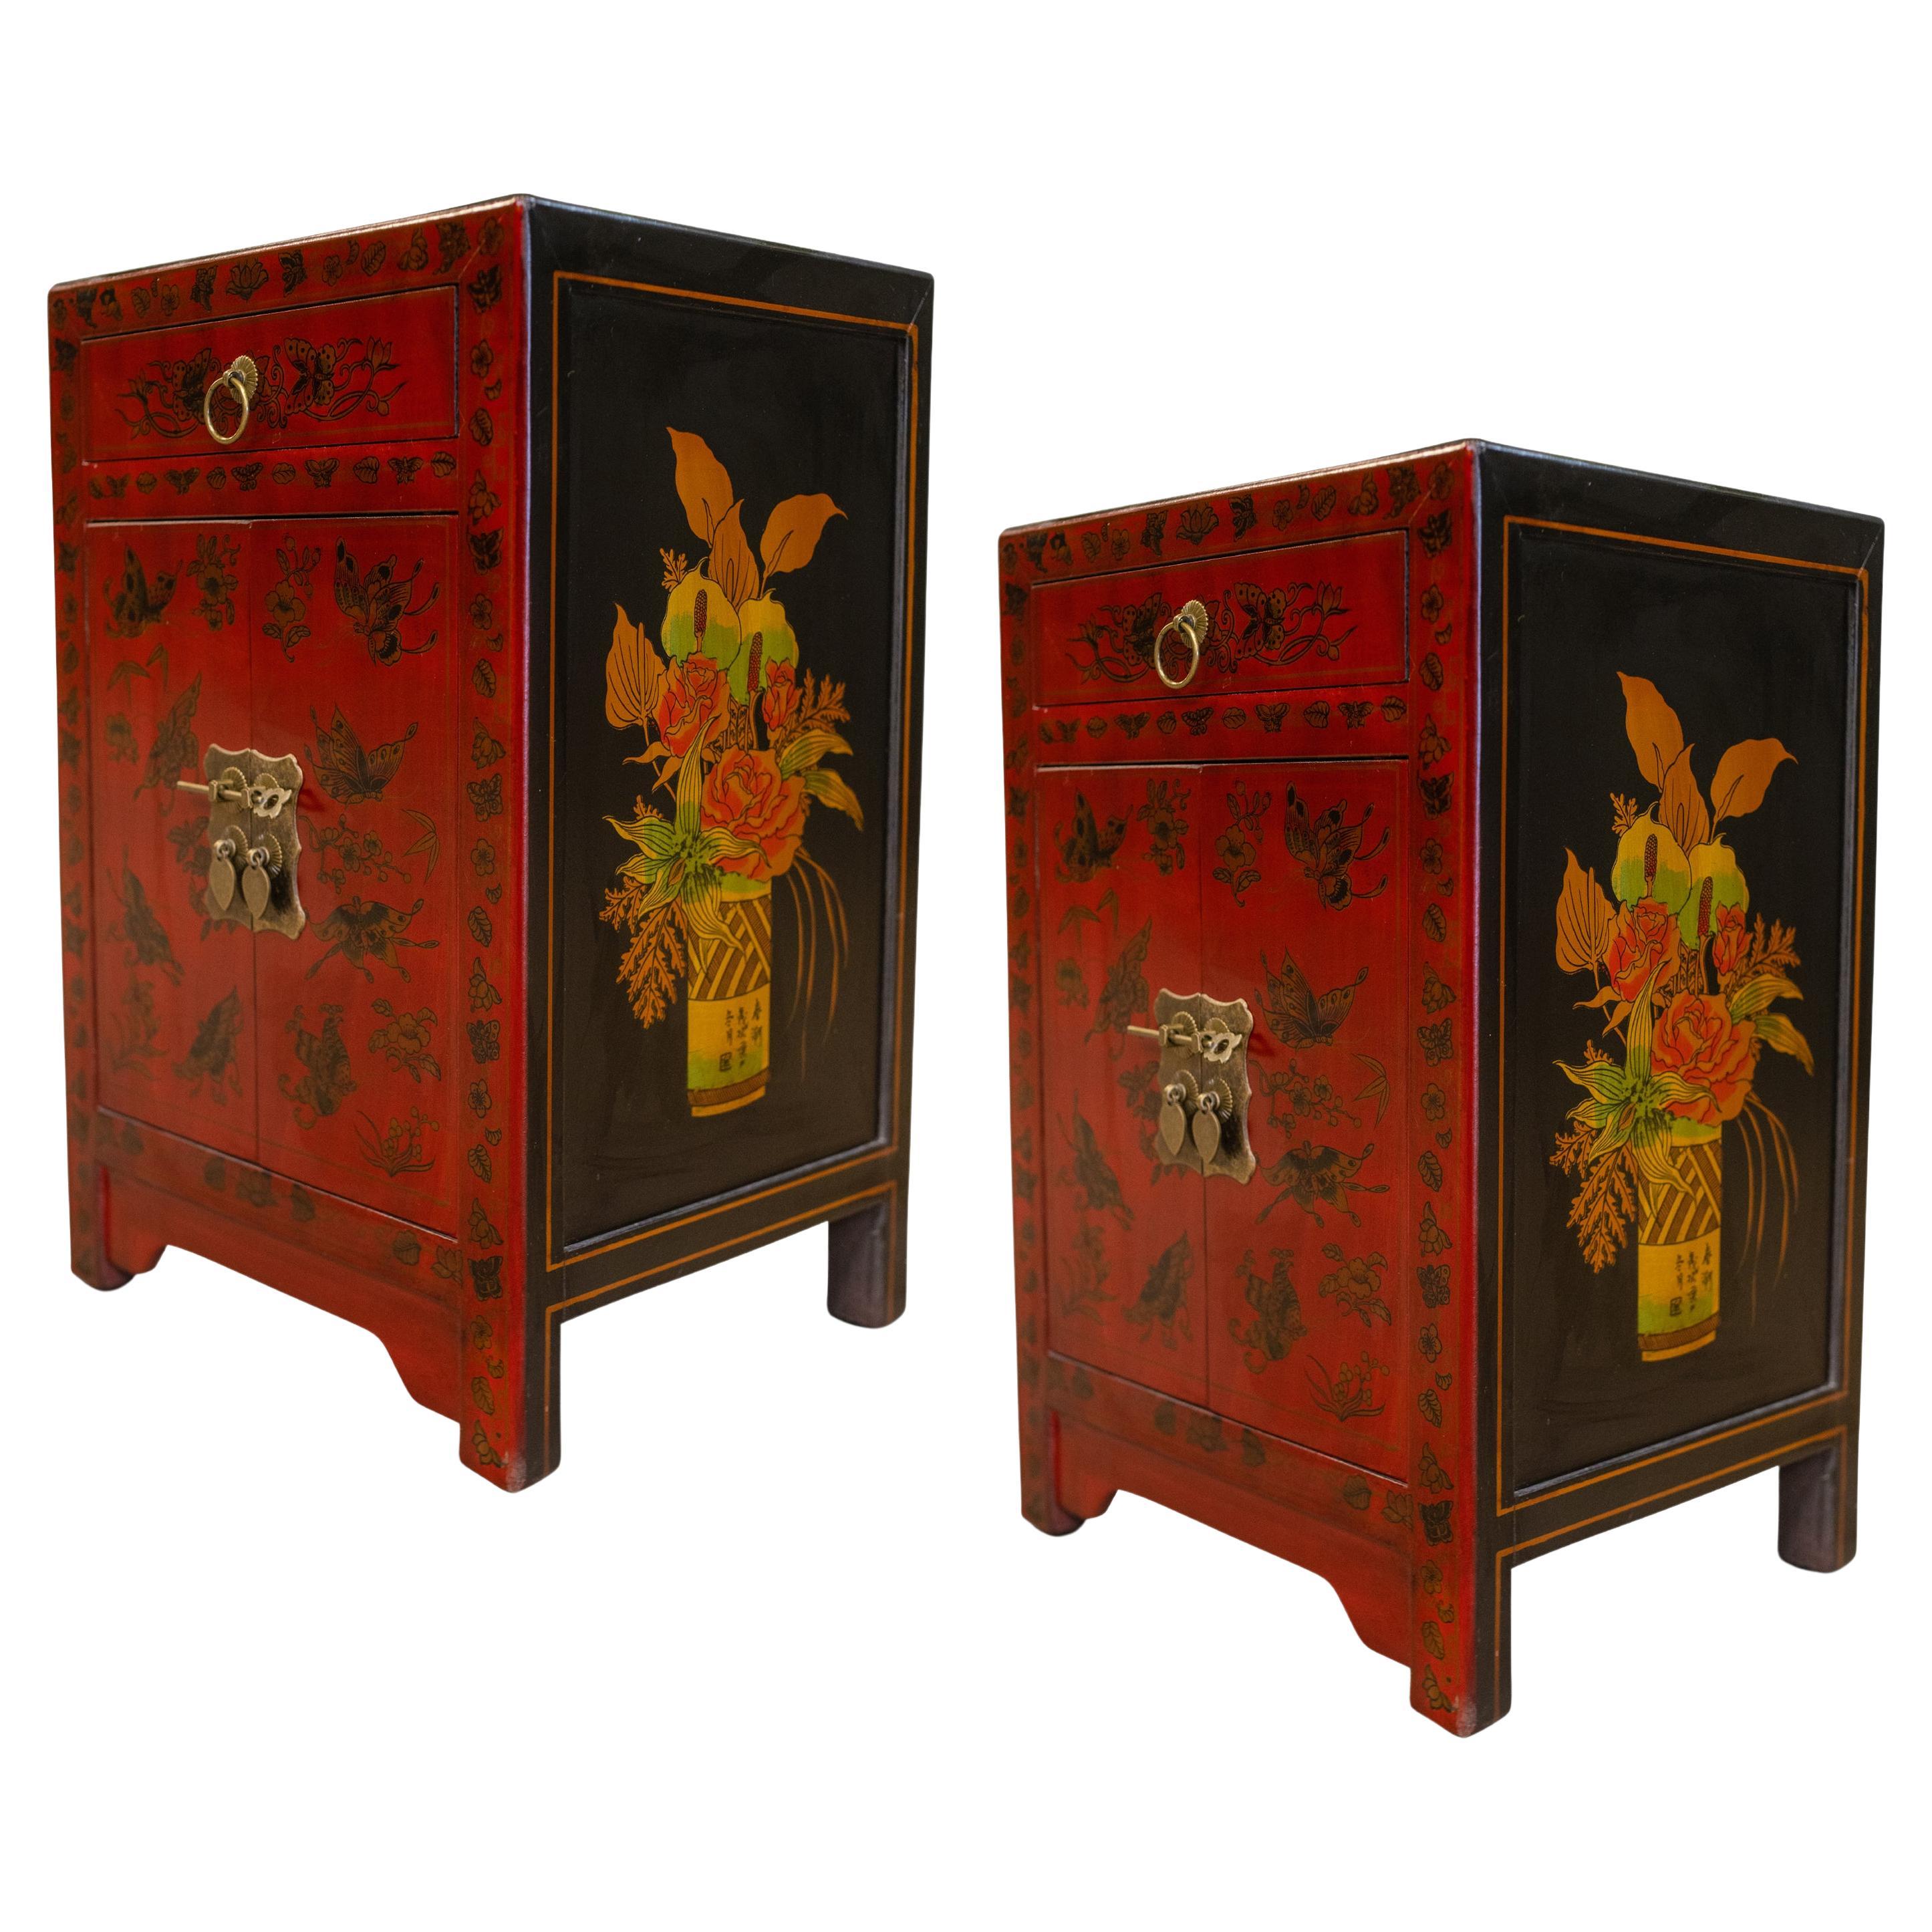 Pair of Matching Red Lacquered Bedside Tables / Cabinets with Drawers